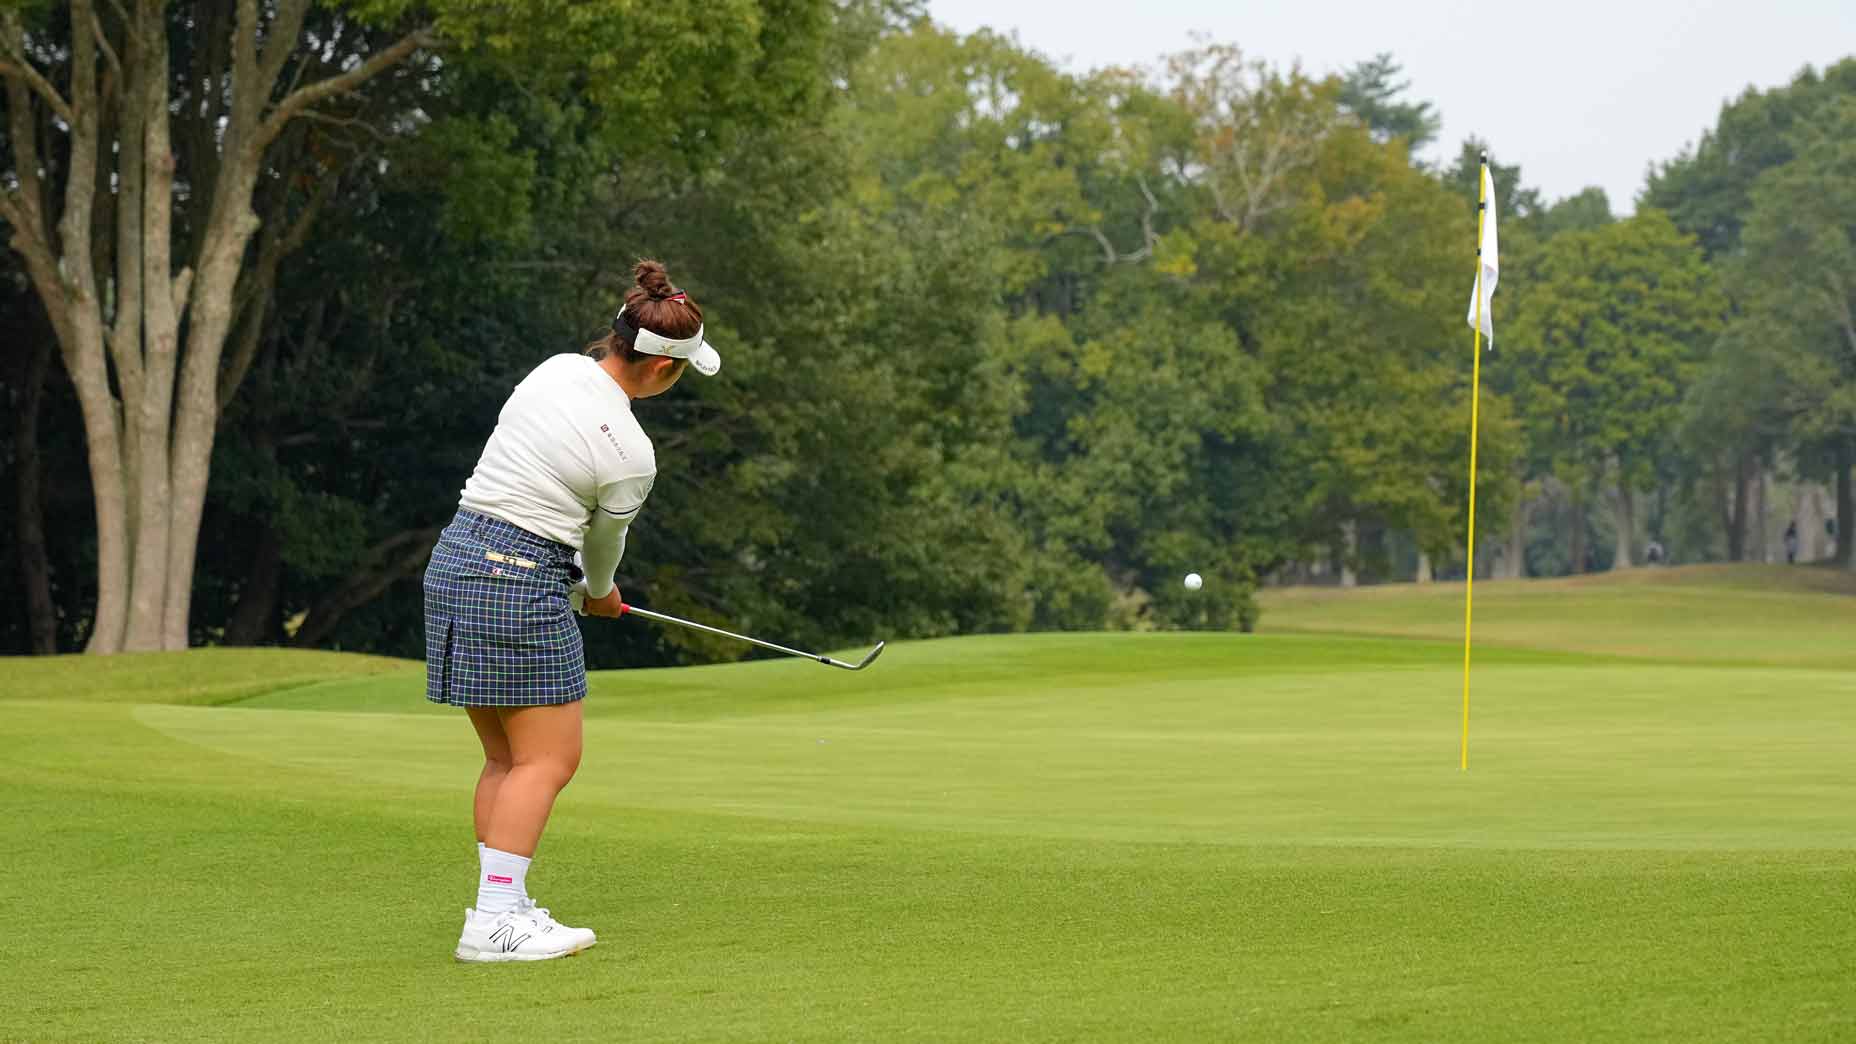 When you can't use your putter on a short chip and need some added touch, use these tips from GOLF Top 100 Teacher Kellie Stenzel